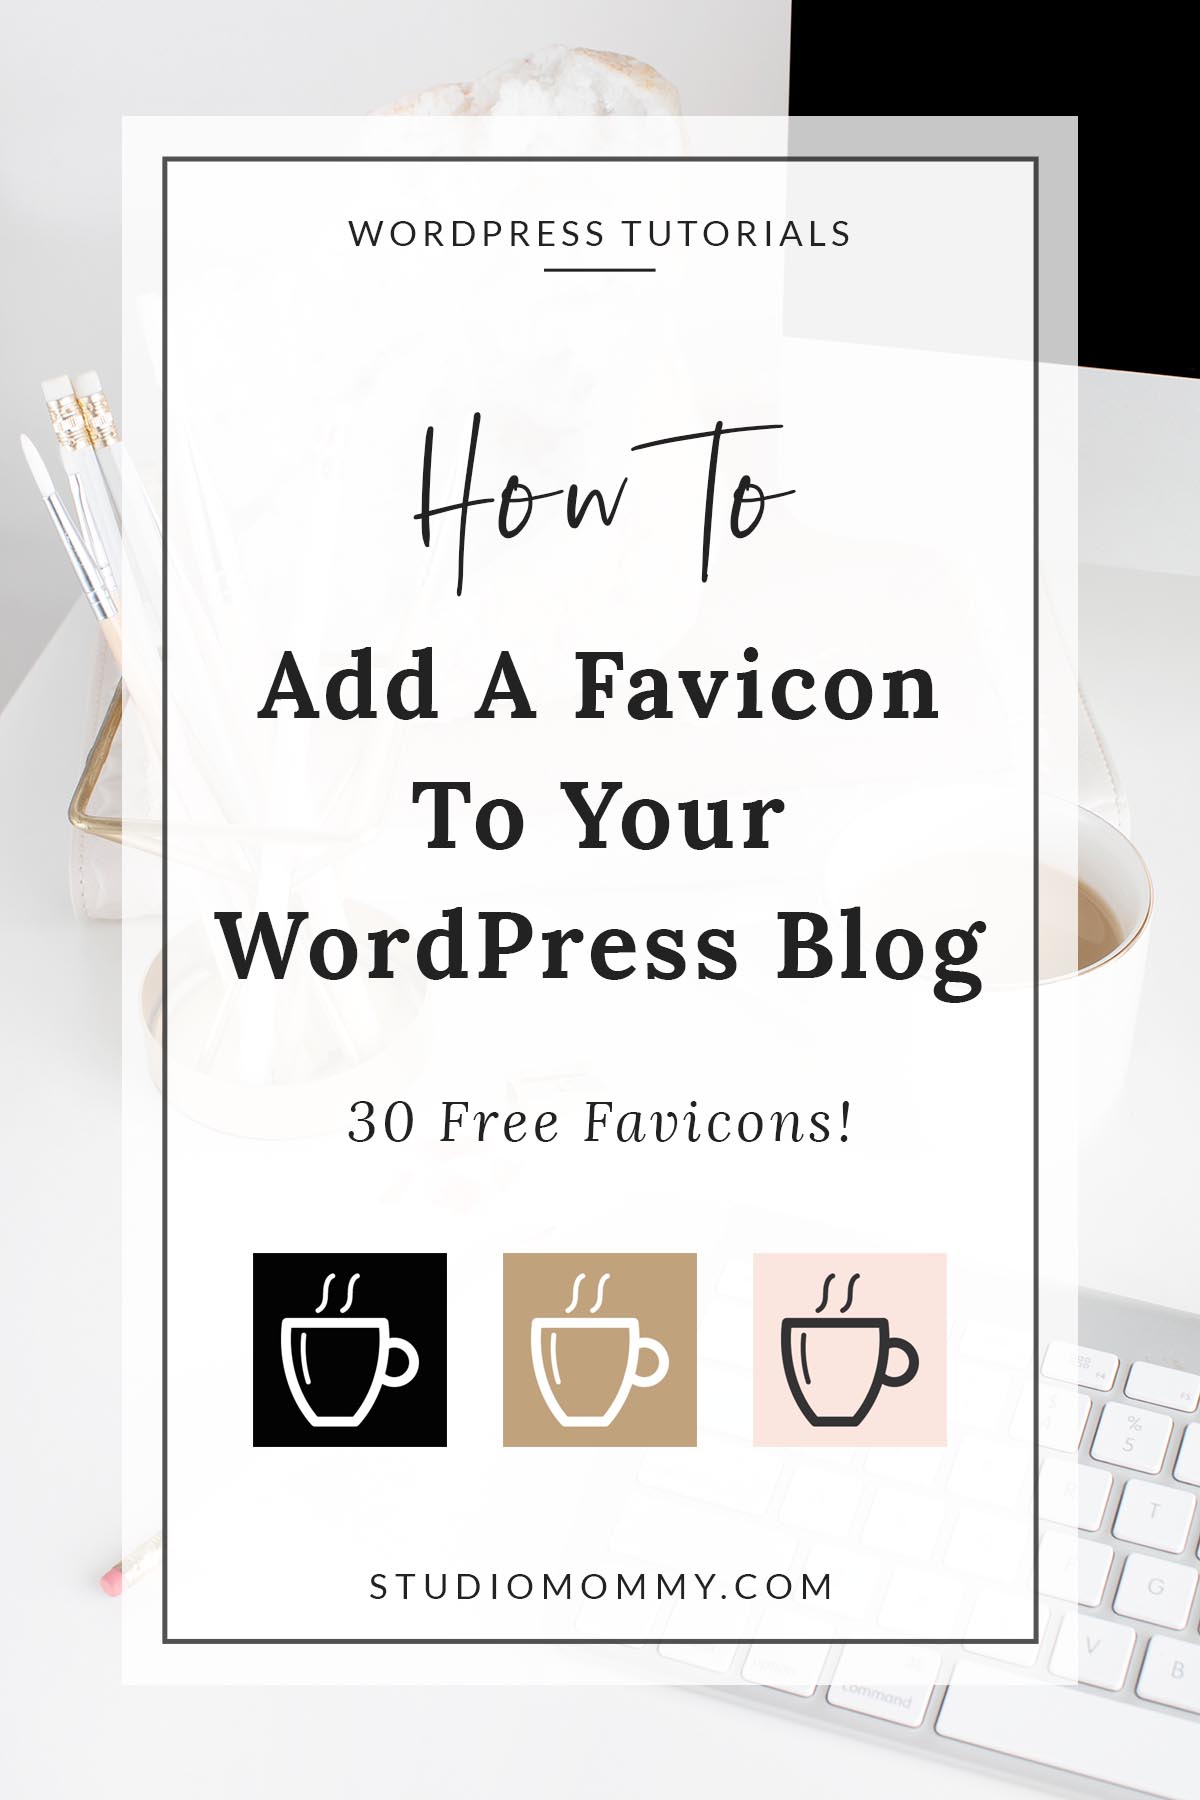 How to add Favicon to WordPress Blog